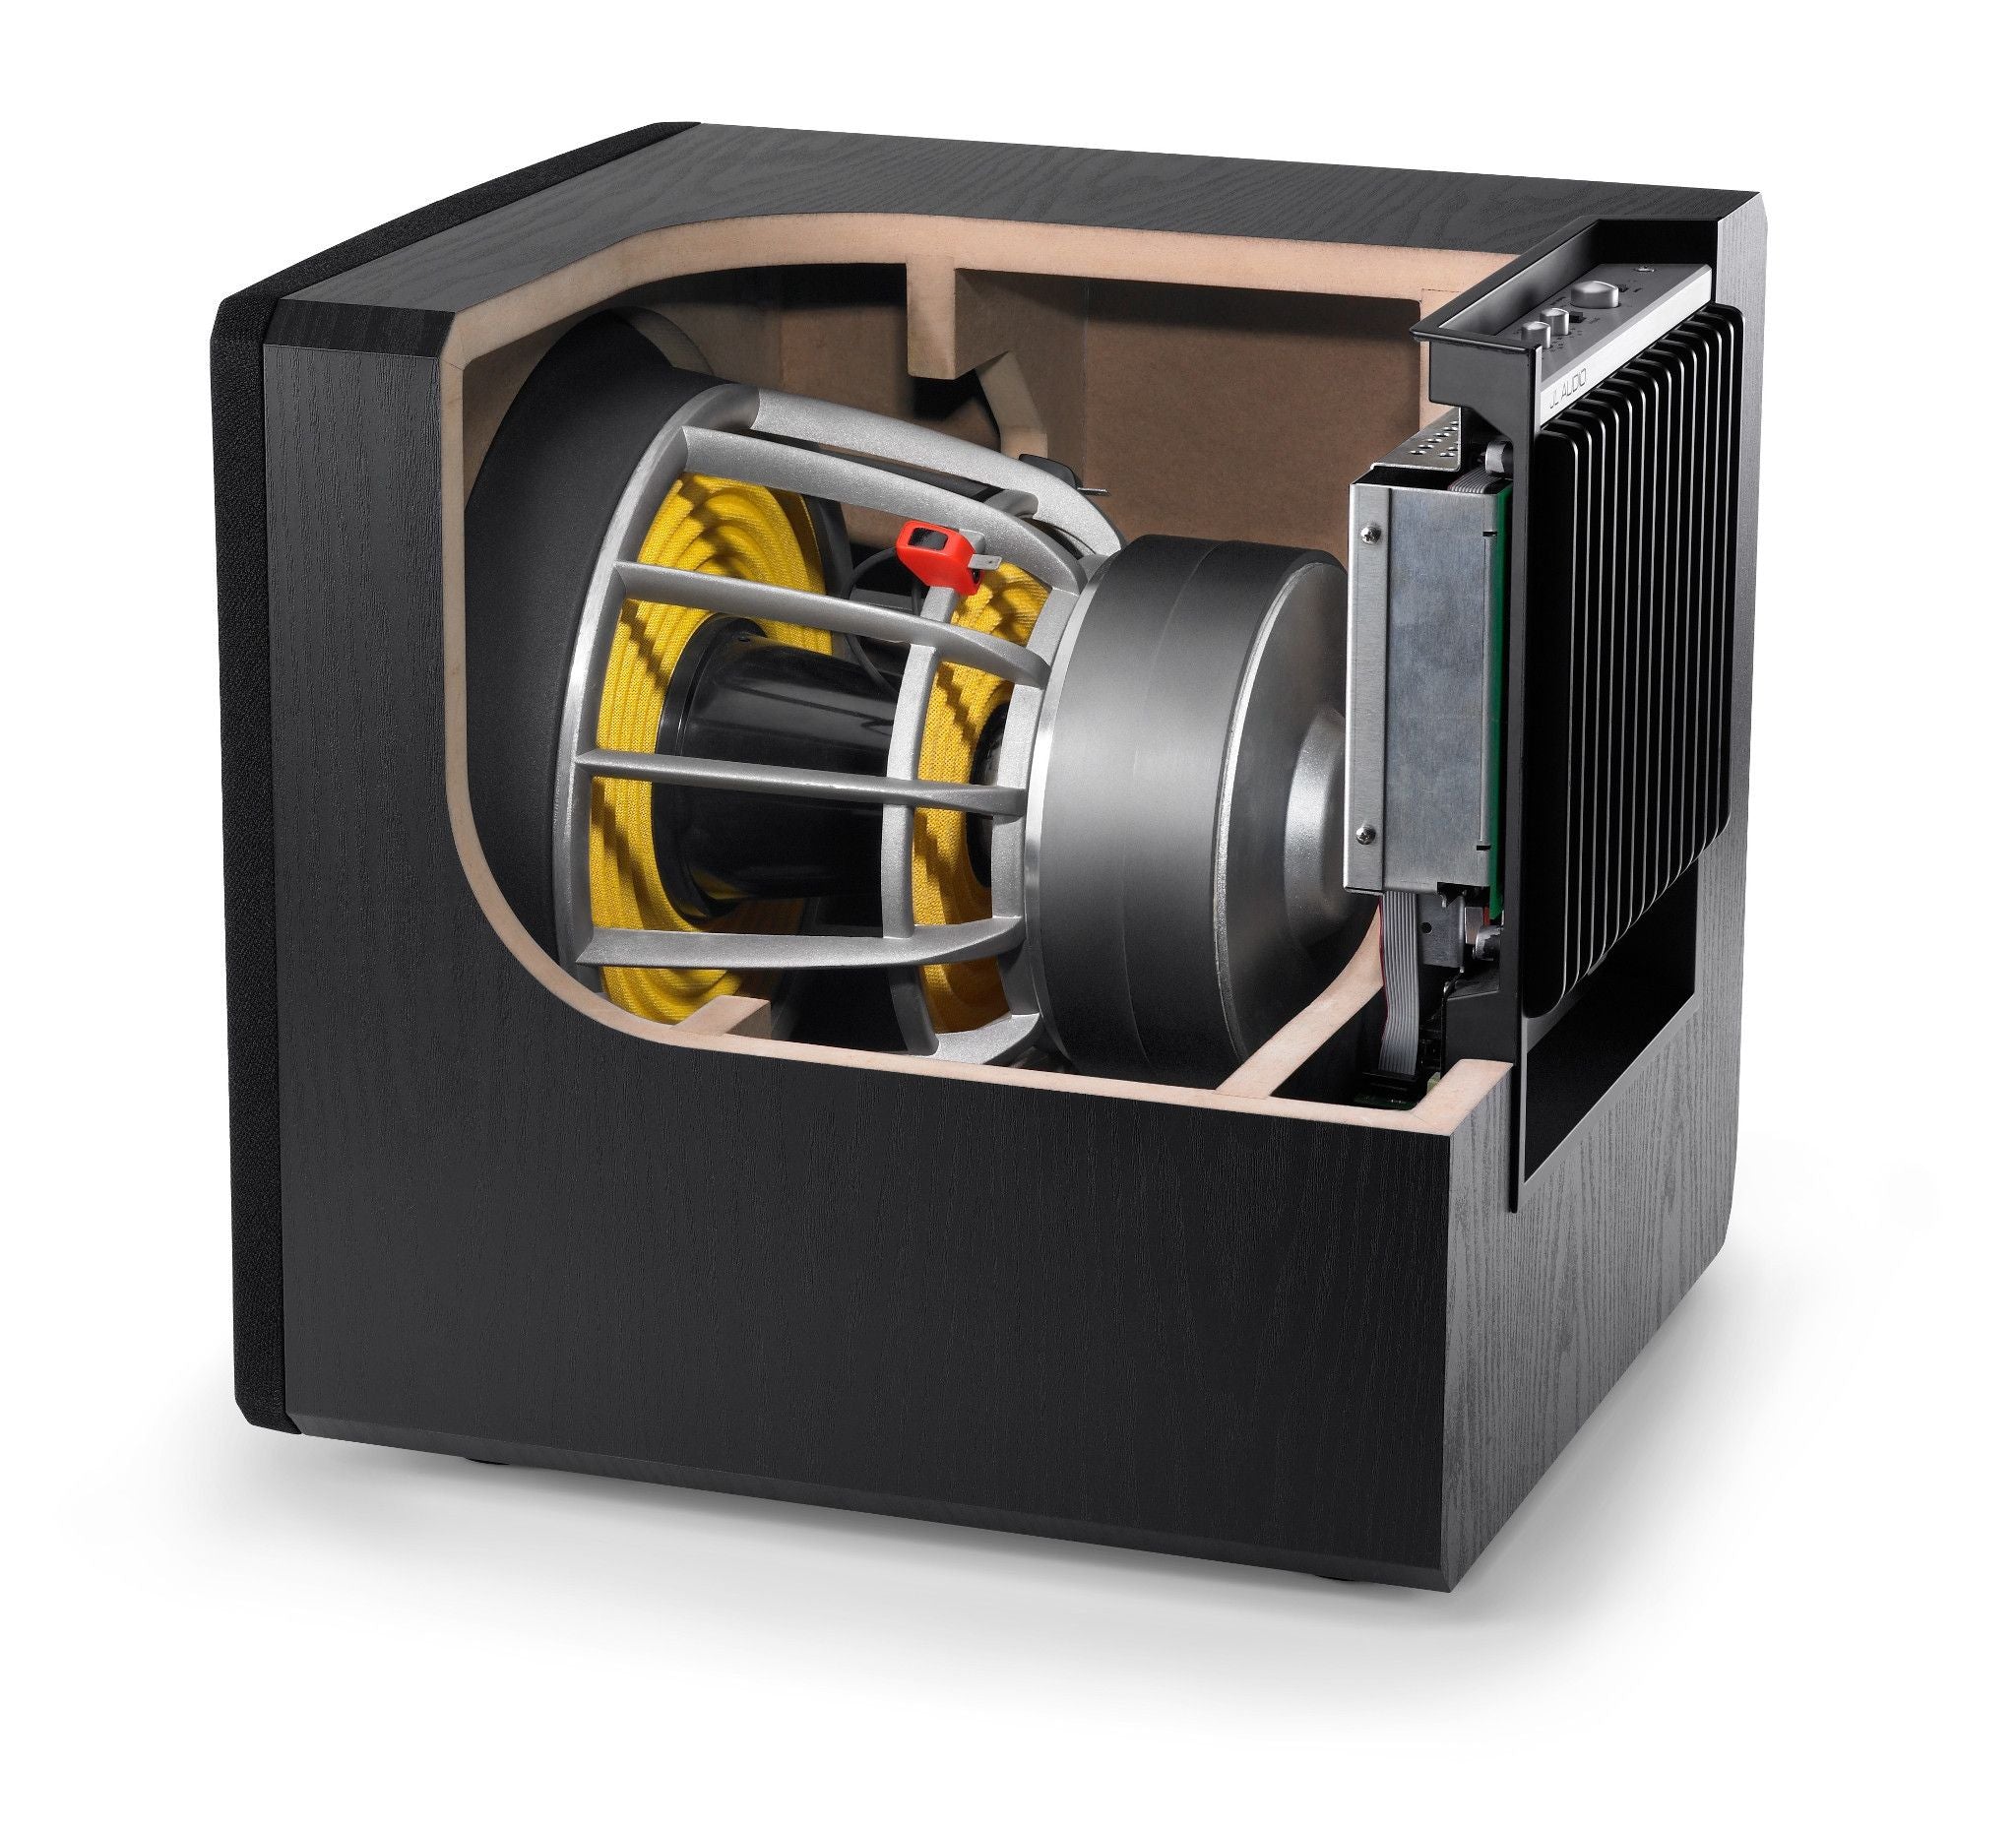 Cutaway of e112 Subwoofer Showing Subwoofer and Internal Bracing